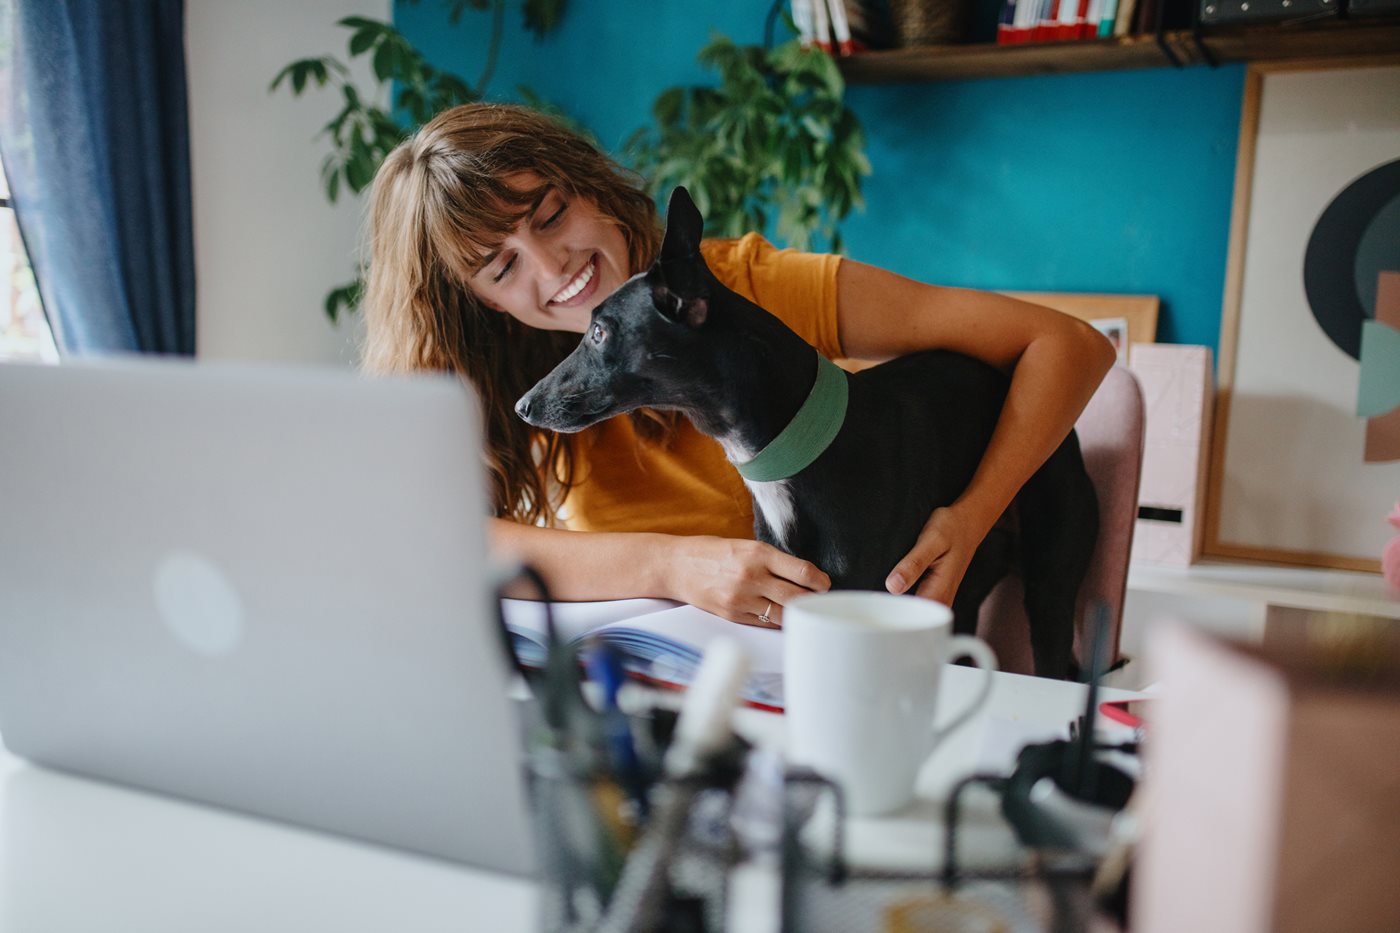 A young woman smiles at her dog on her lap while they sit at her laptop using Spectrum Internet